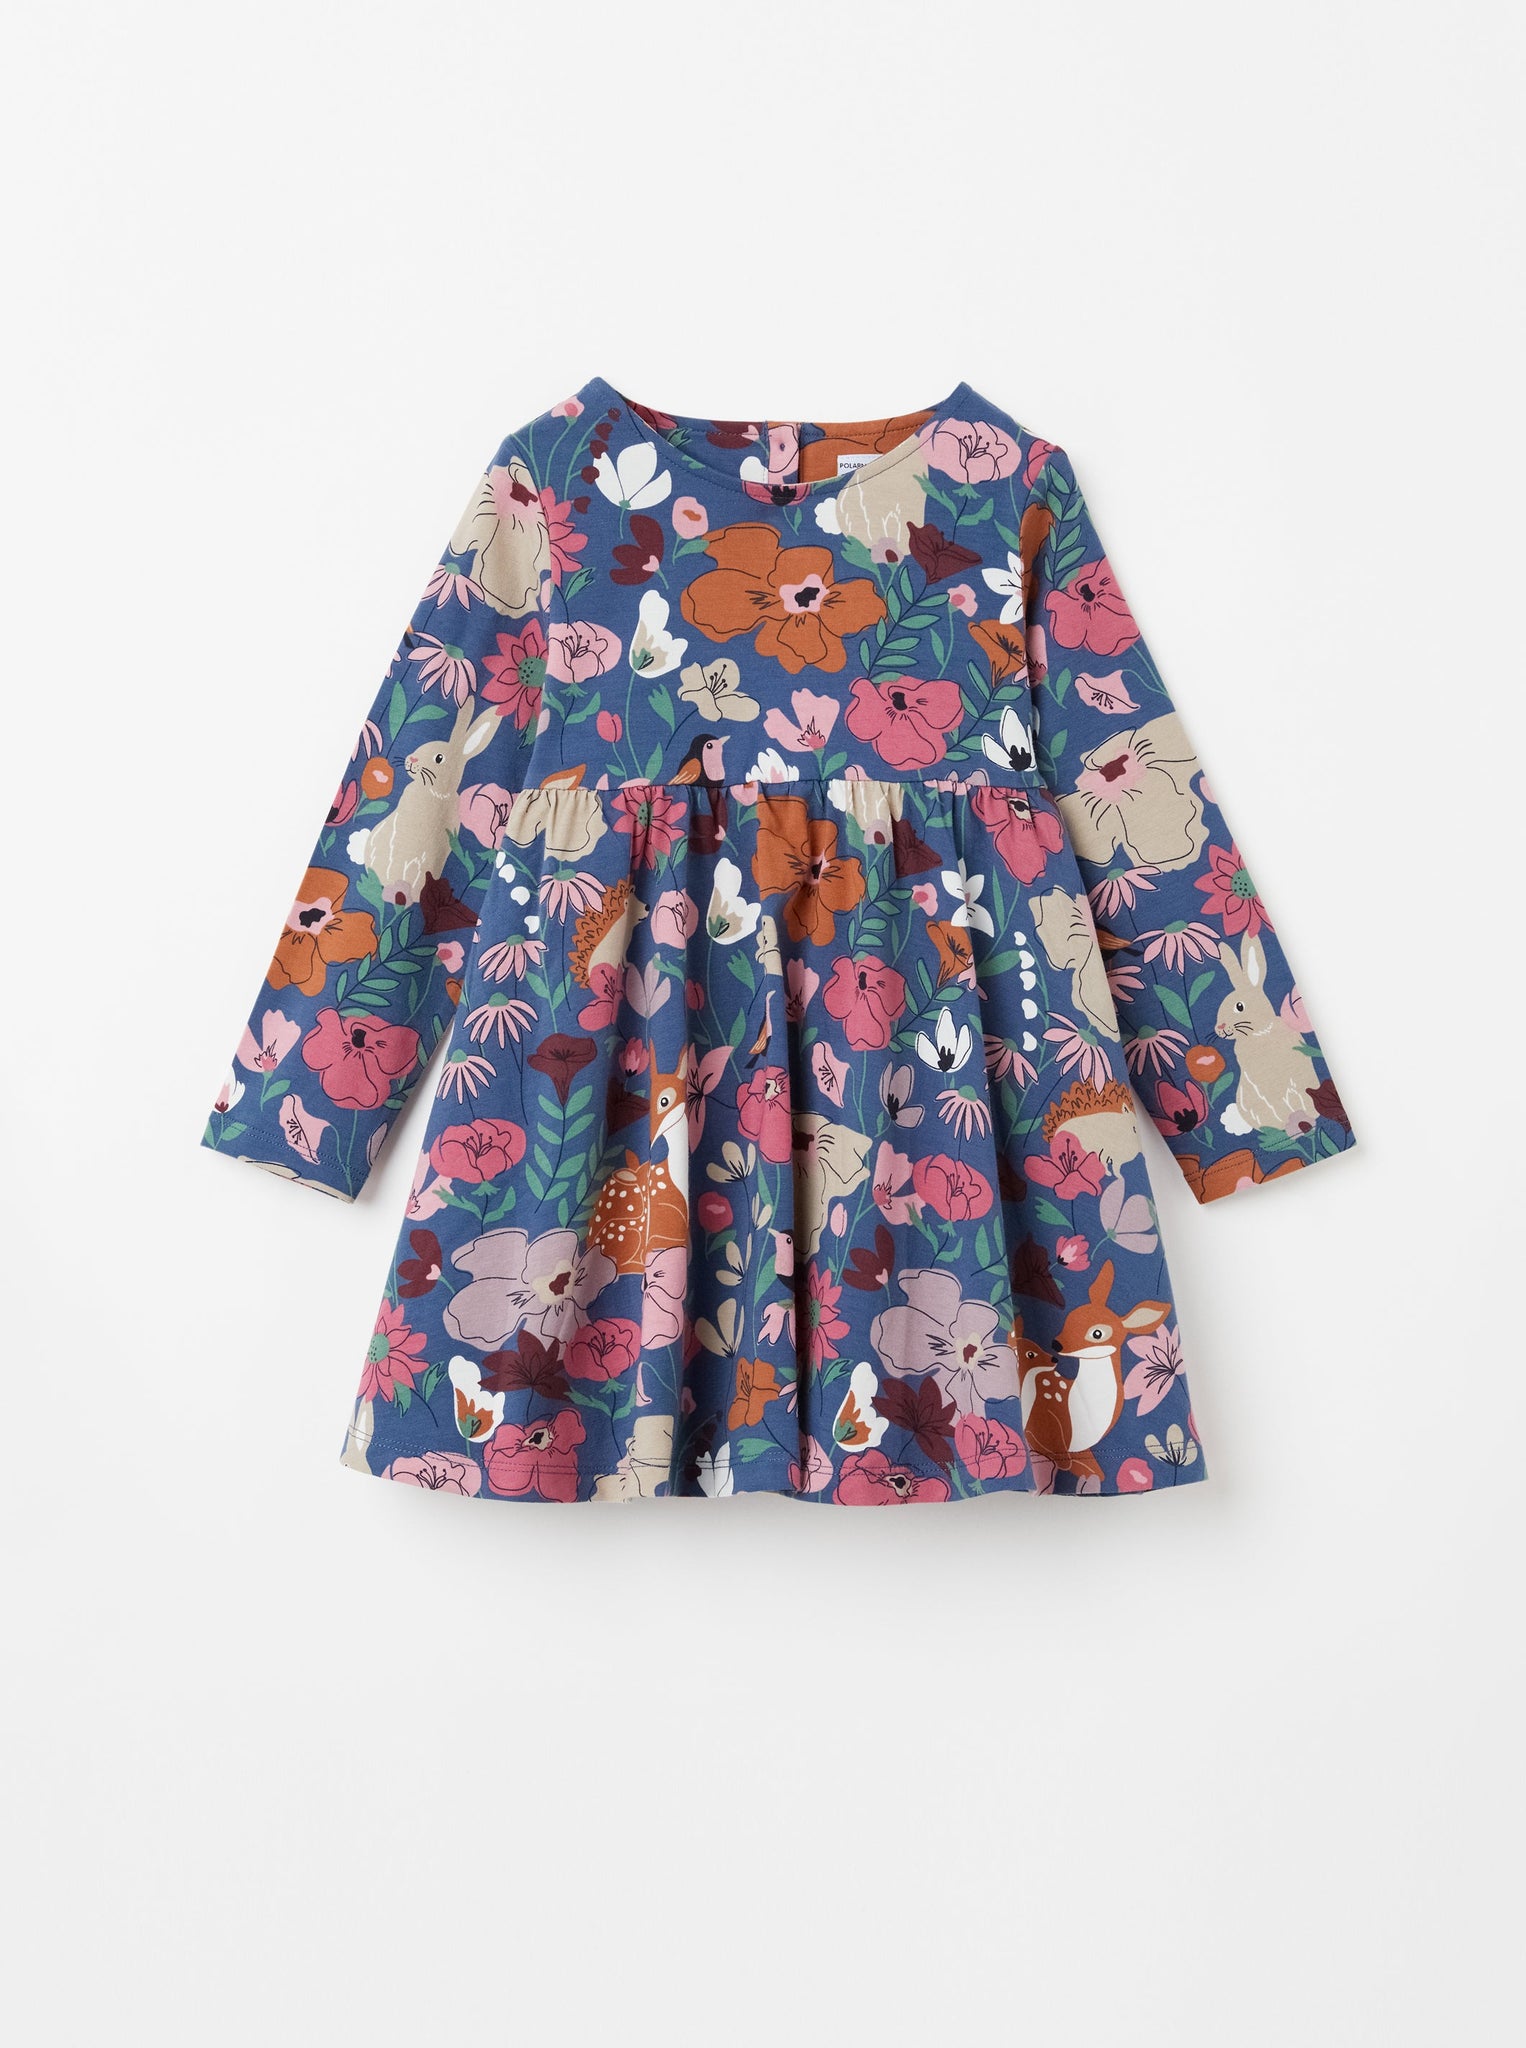 Organic Cotton Blue Floral Kids Dress from the Polarn O. Pyret Kidswear collection. The best ethical kids clothes